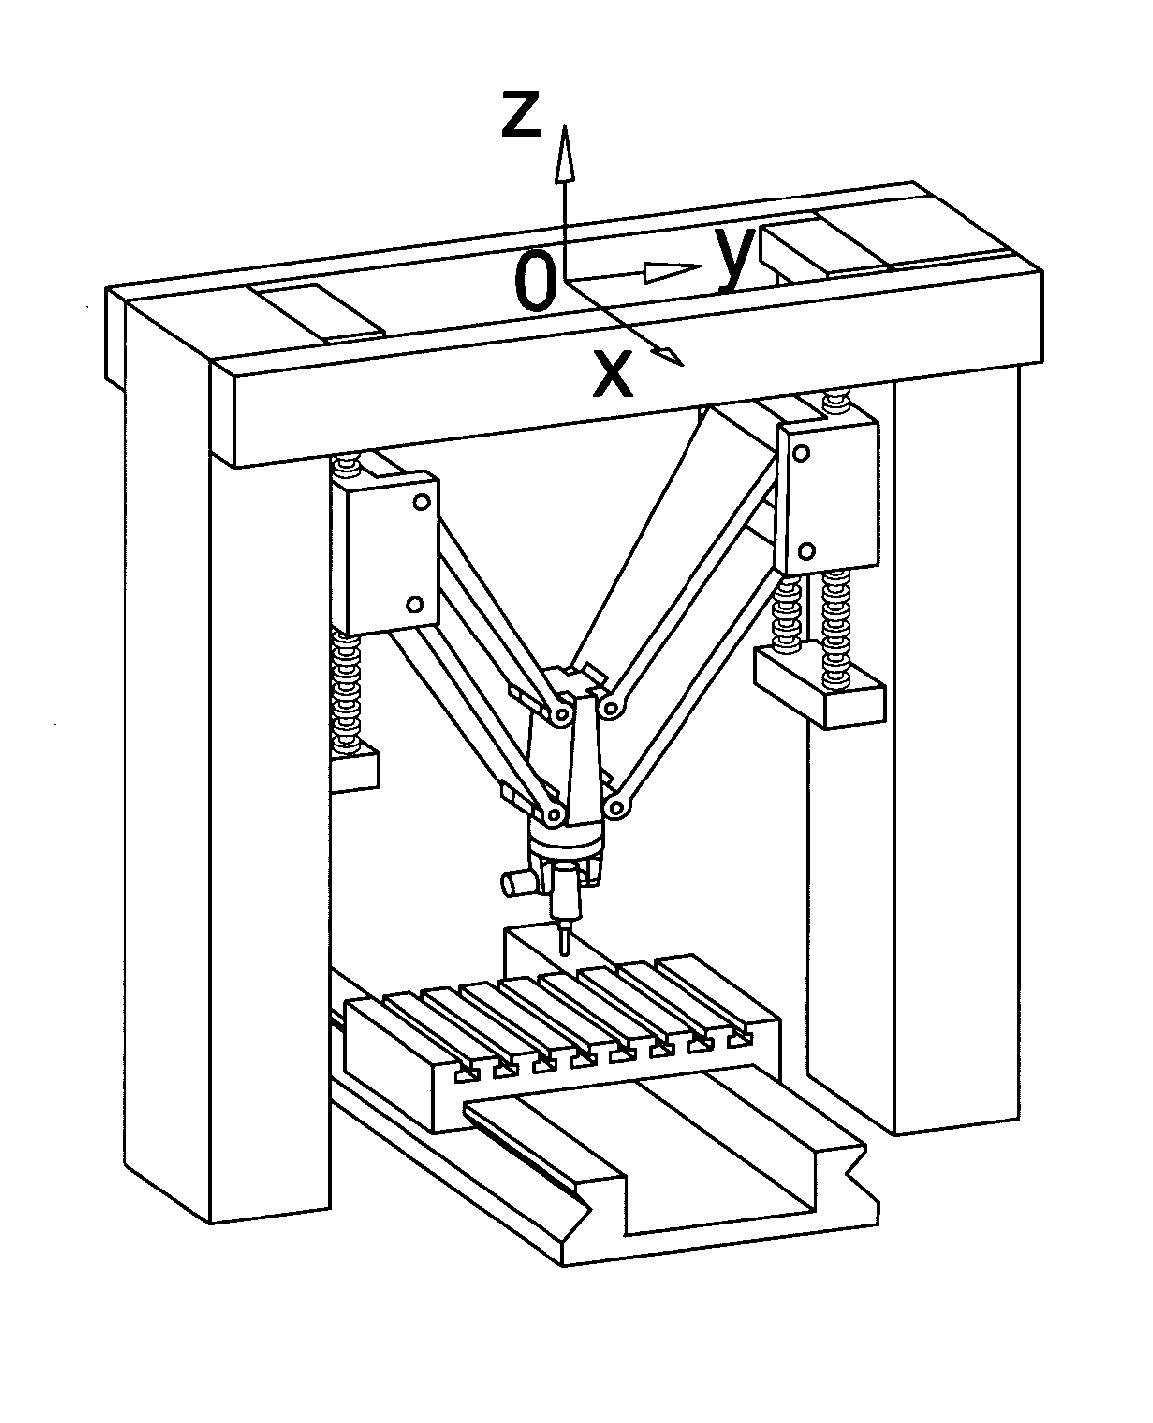 Two degree-of-freedom parallel manipulator